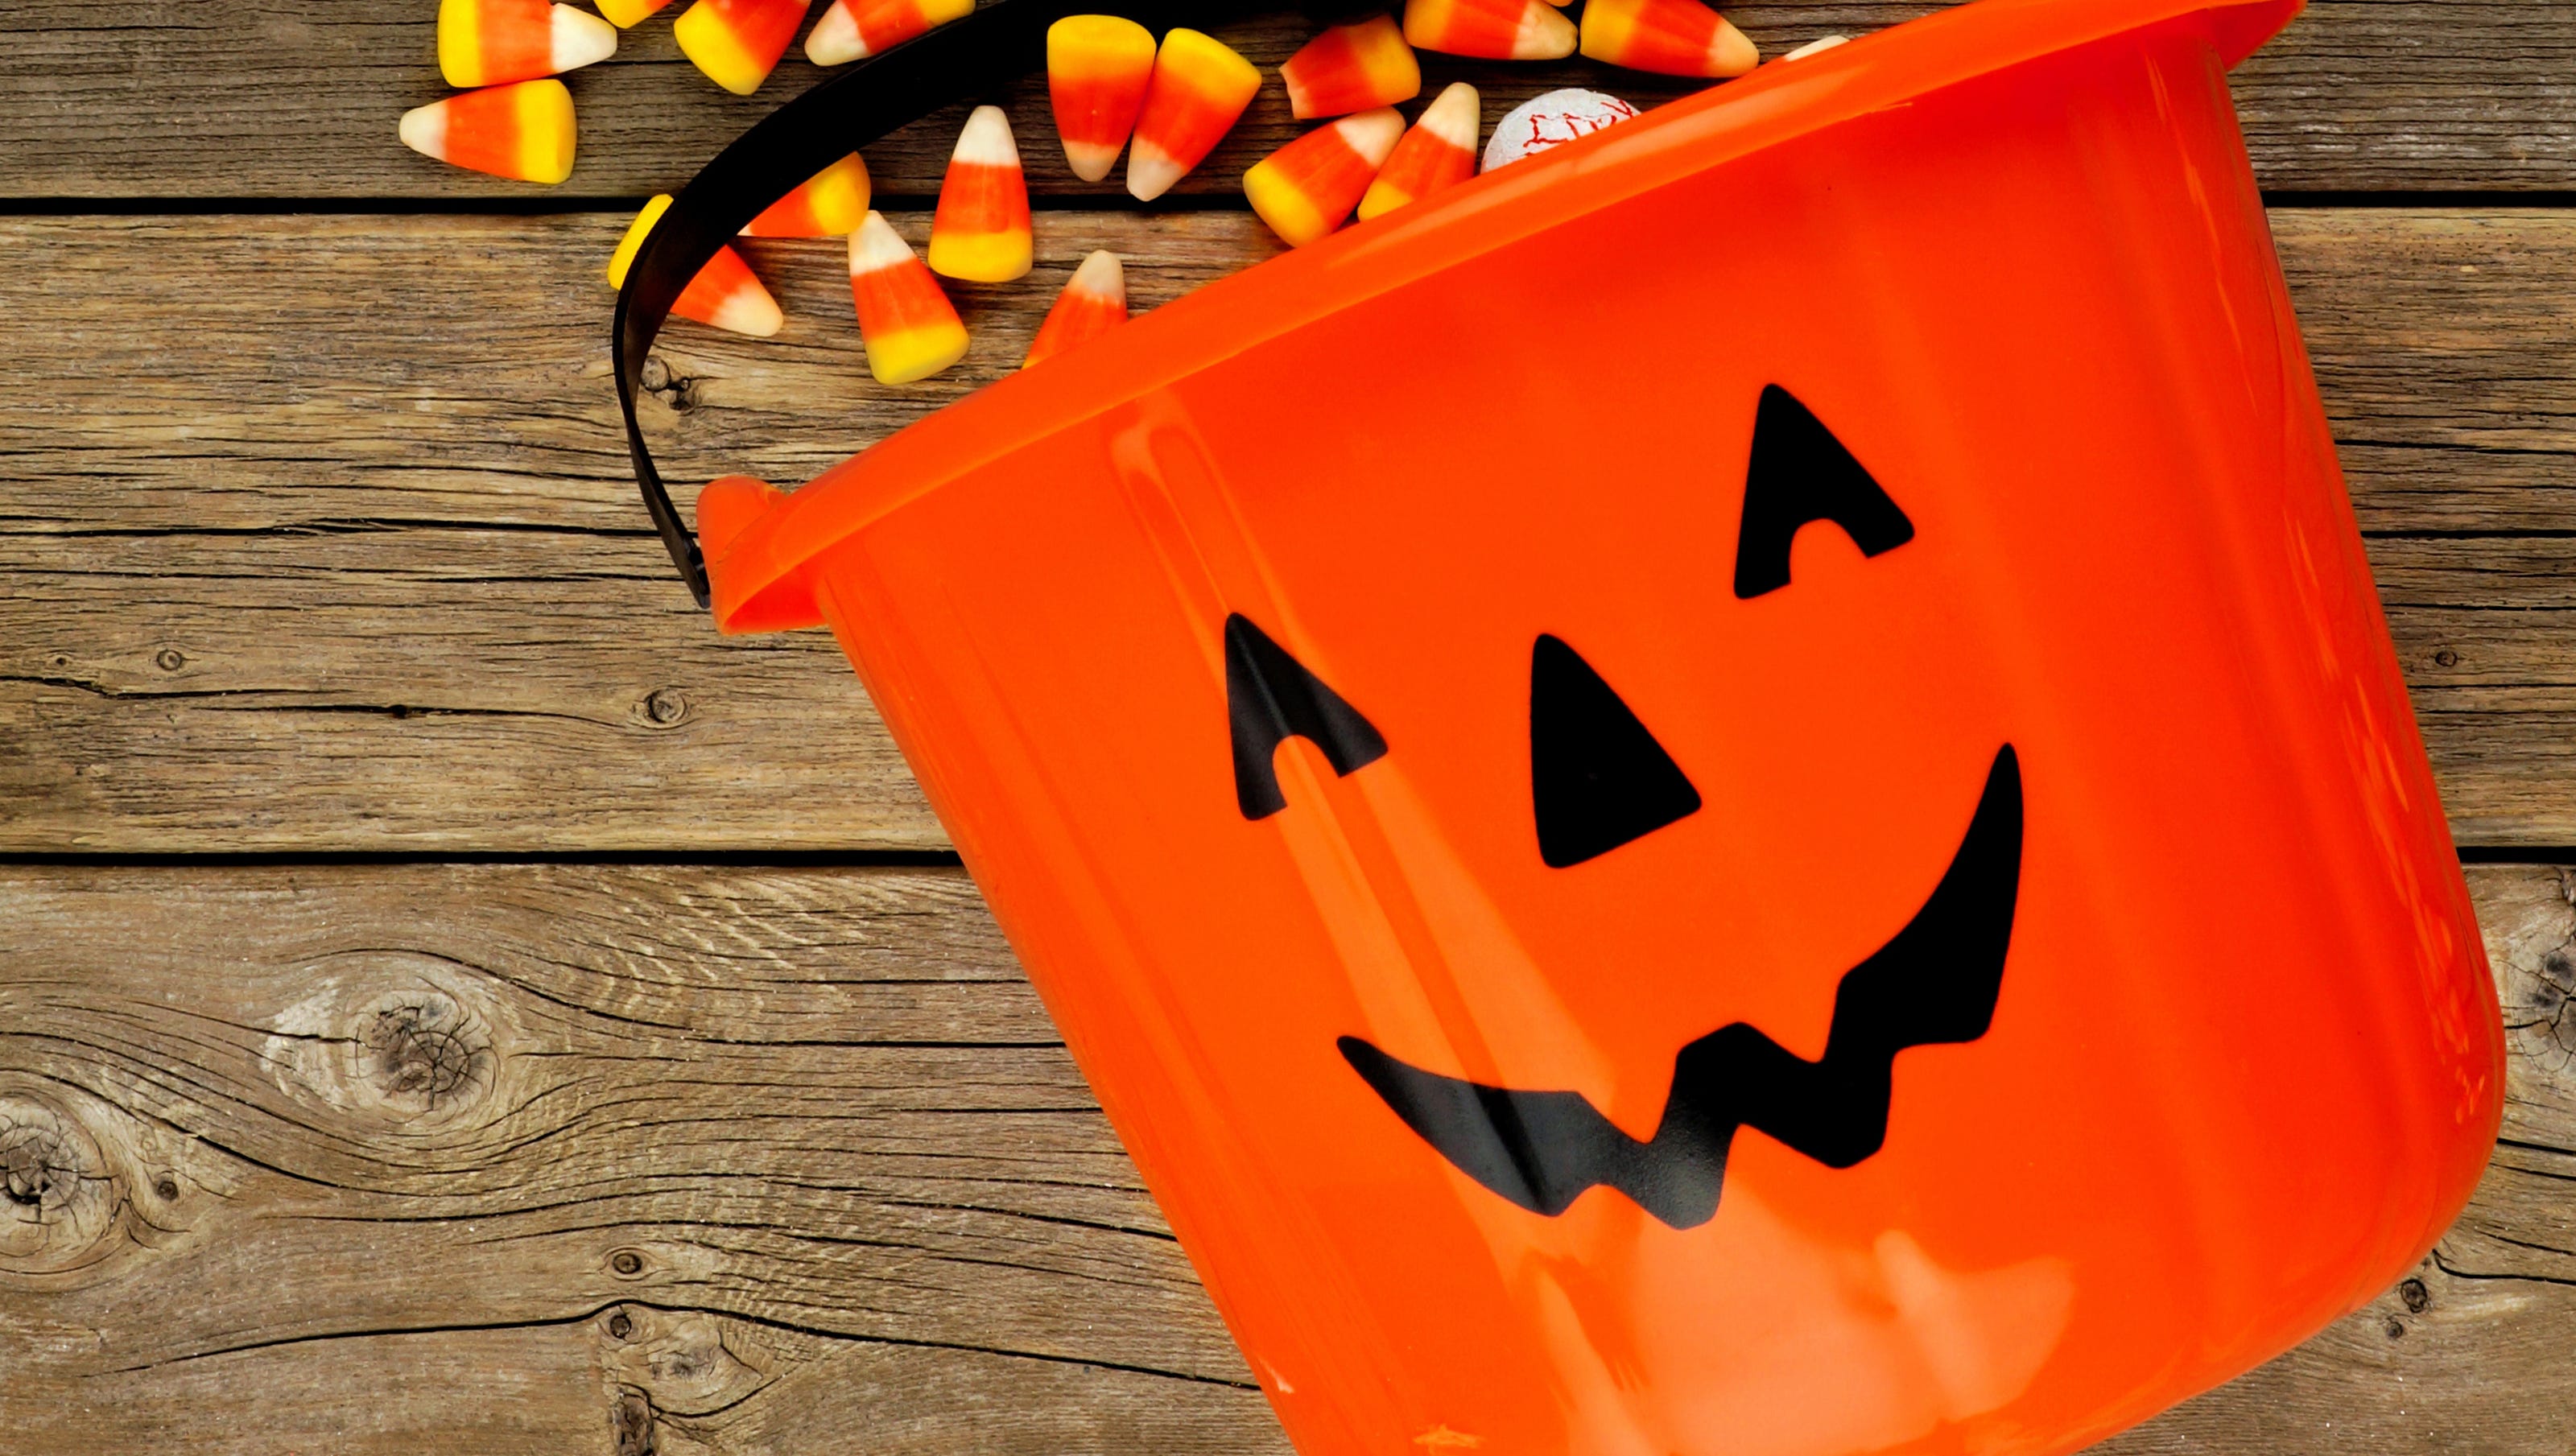 Here's how much Halloween candy you can eat before it kills you